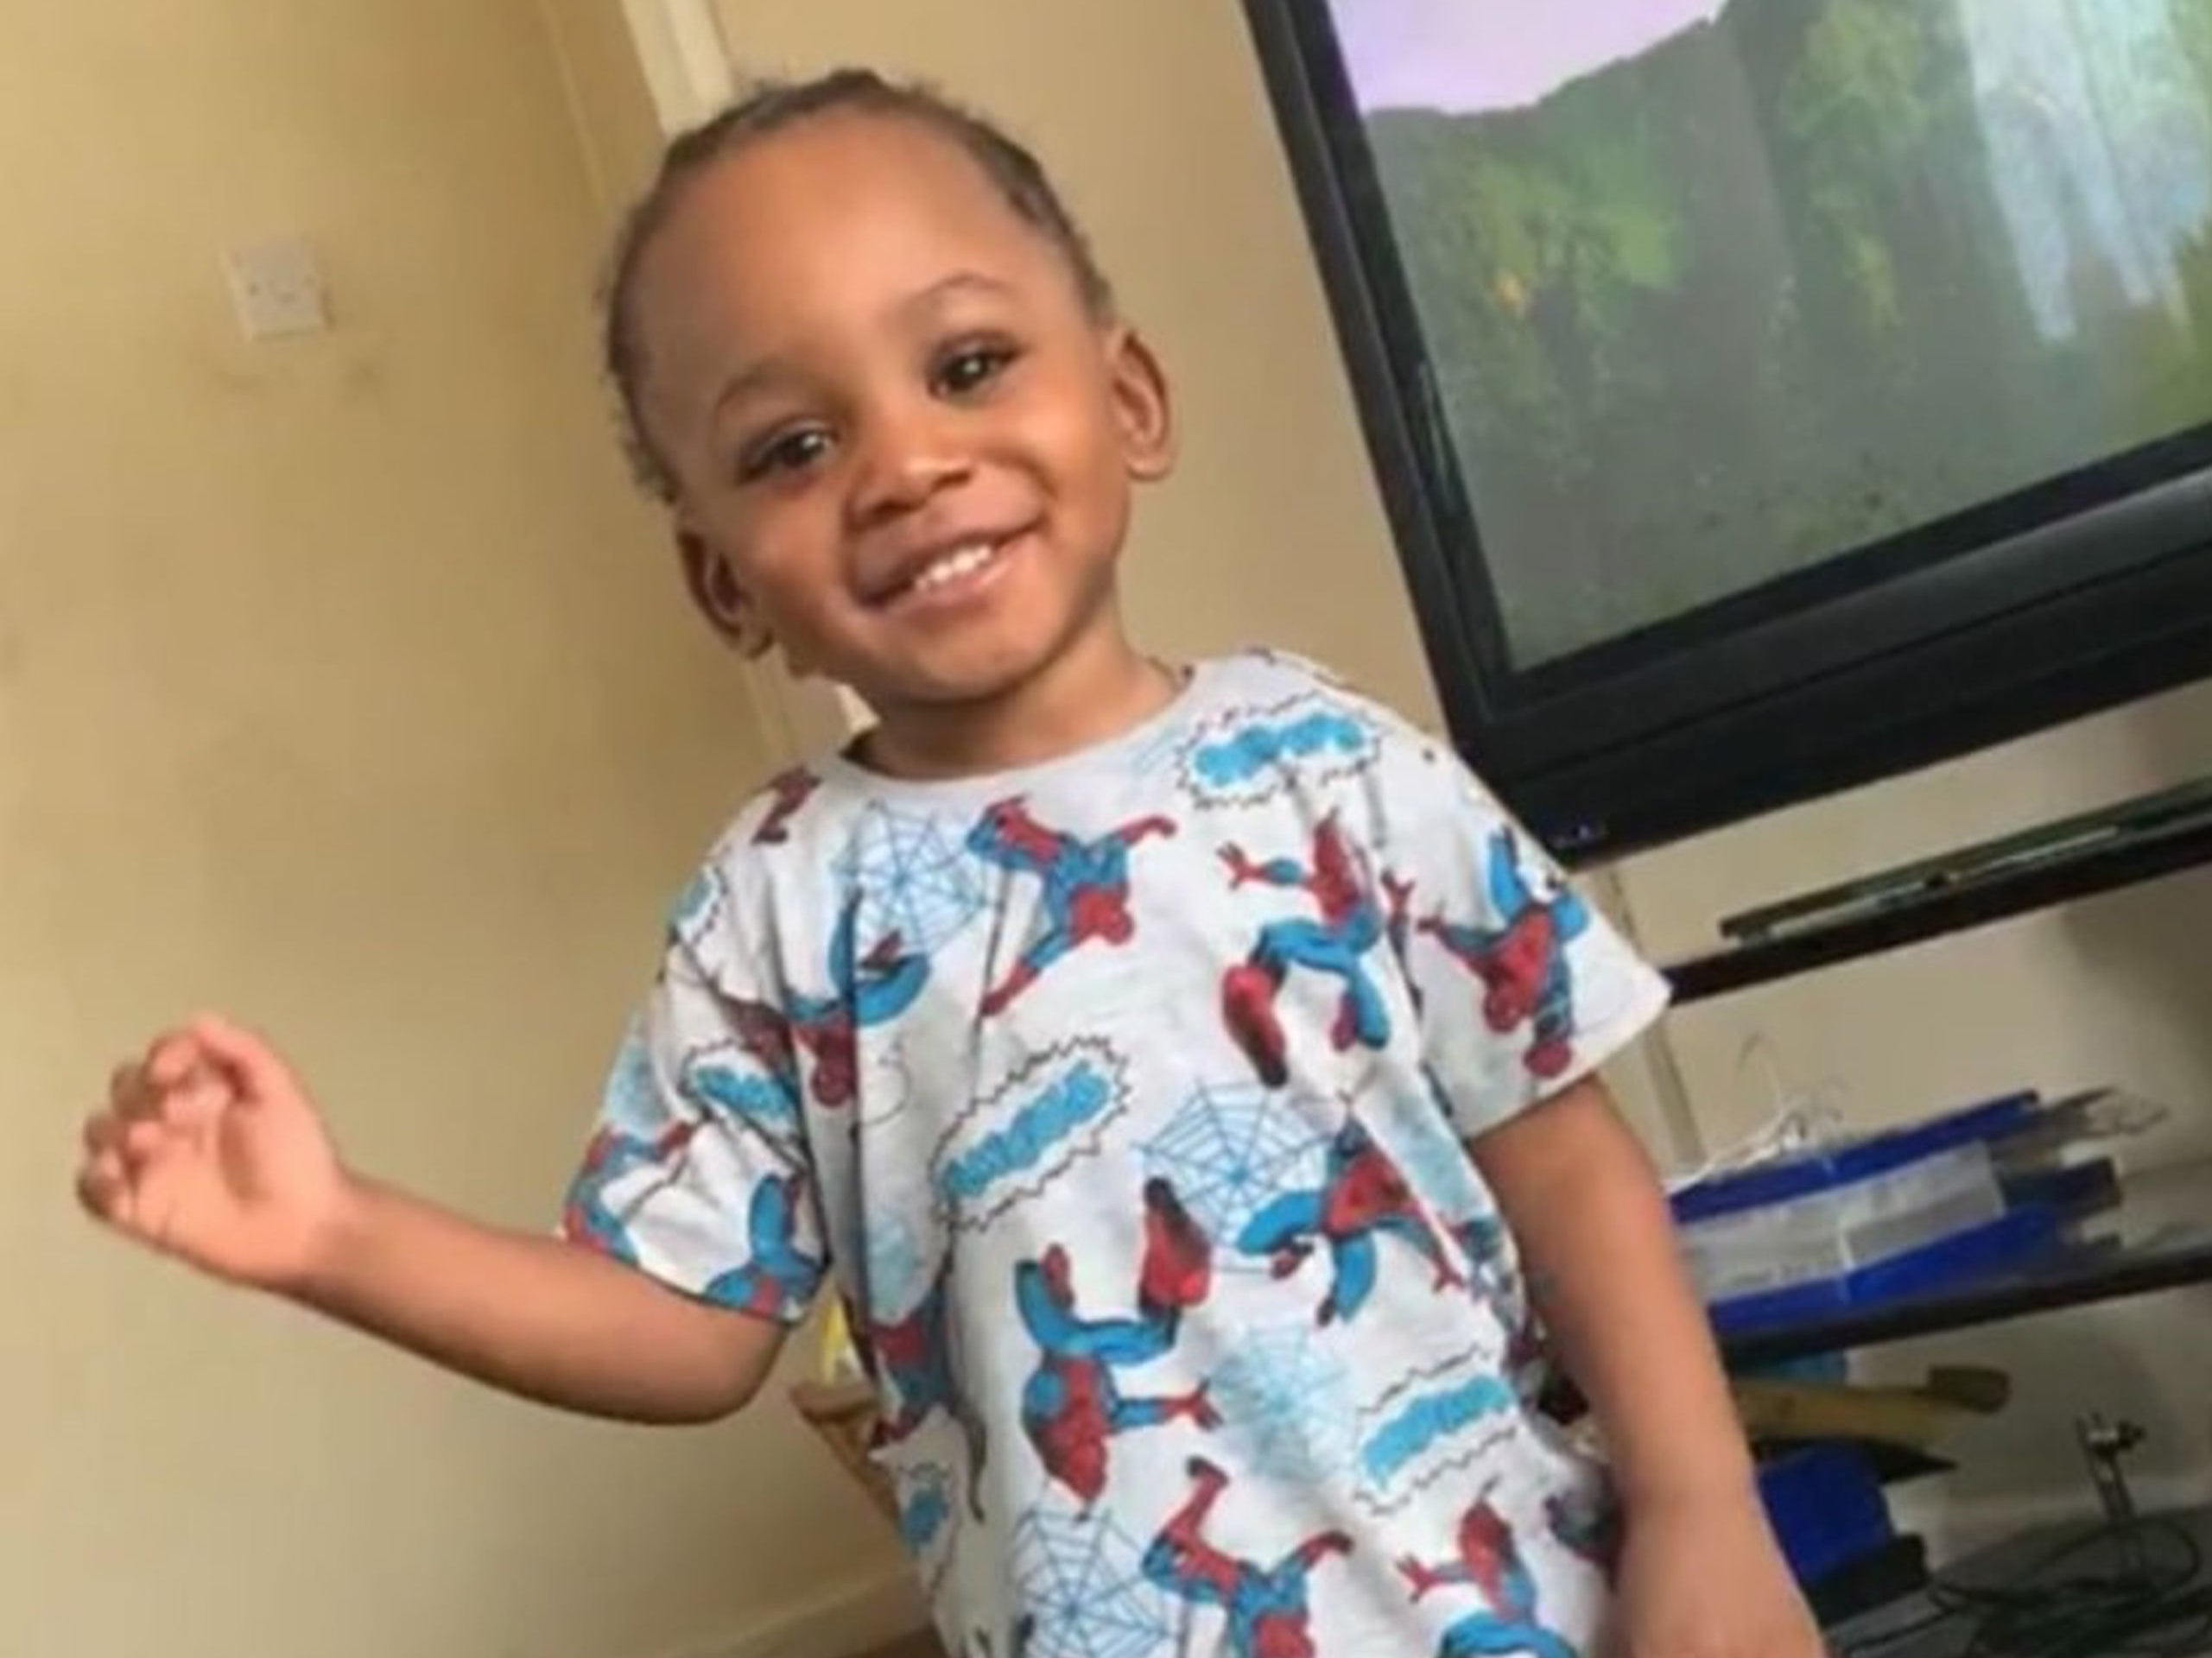 A couple has been found guilty of killing two-year-old Kyrell Matthews after their abuse was captured on secret mobile phone recordings